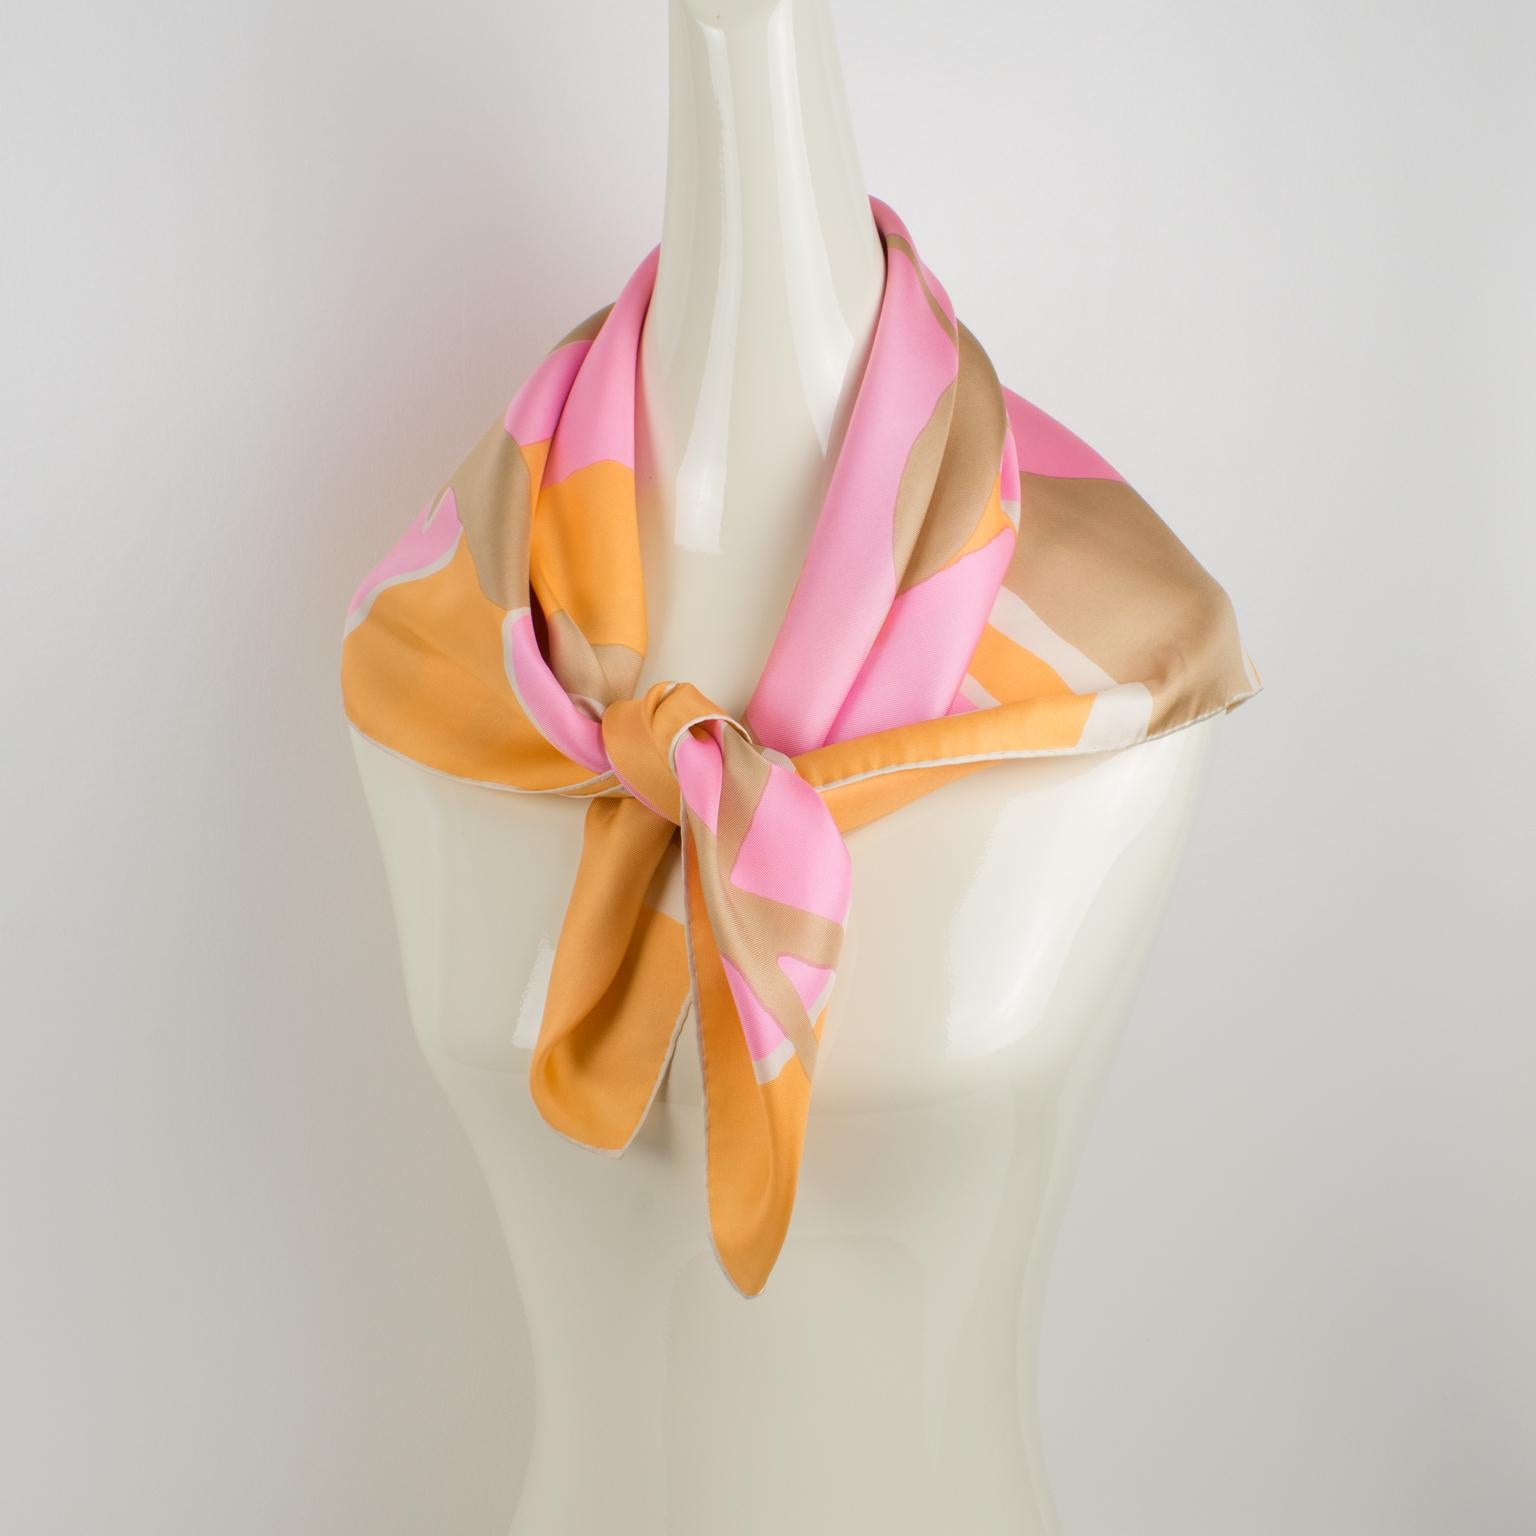 This elegant silk scarf by Nina Ricci Paris in pink and orange colors features a floral abstract 1970s design print. The Nina Ricci Paris's signature name is in the lower right corner. The combination of colors is bright and vibrant, with ballet